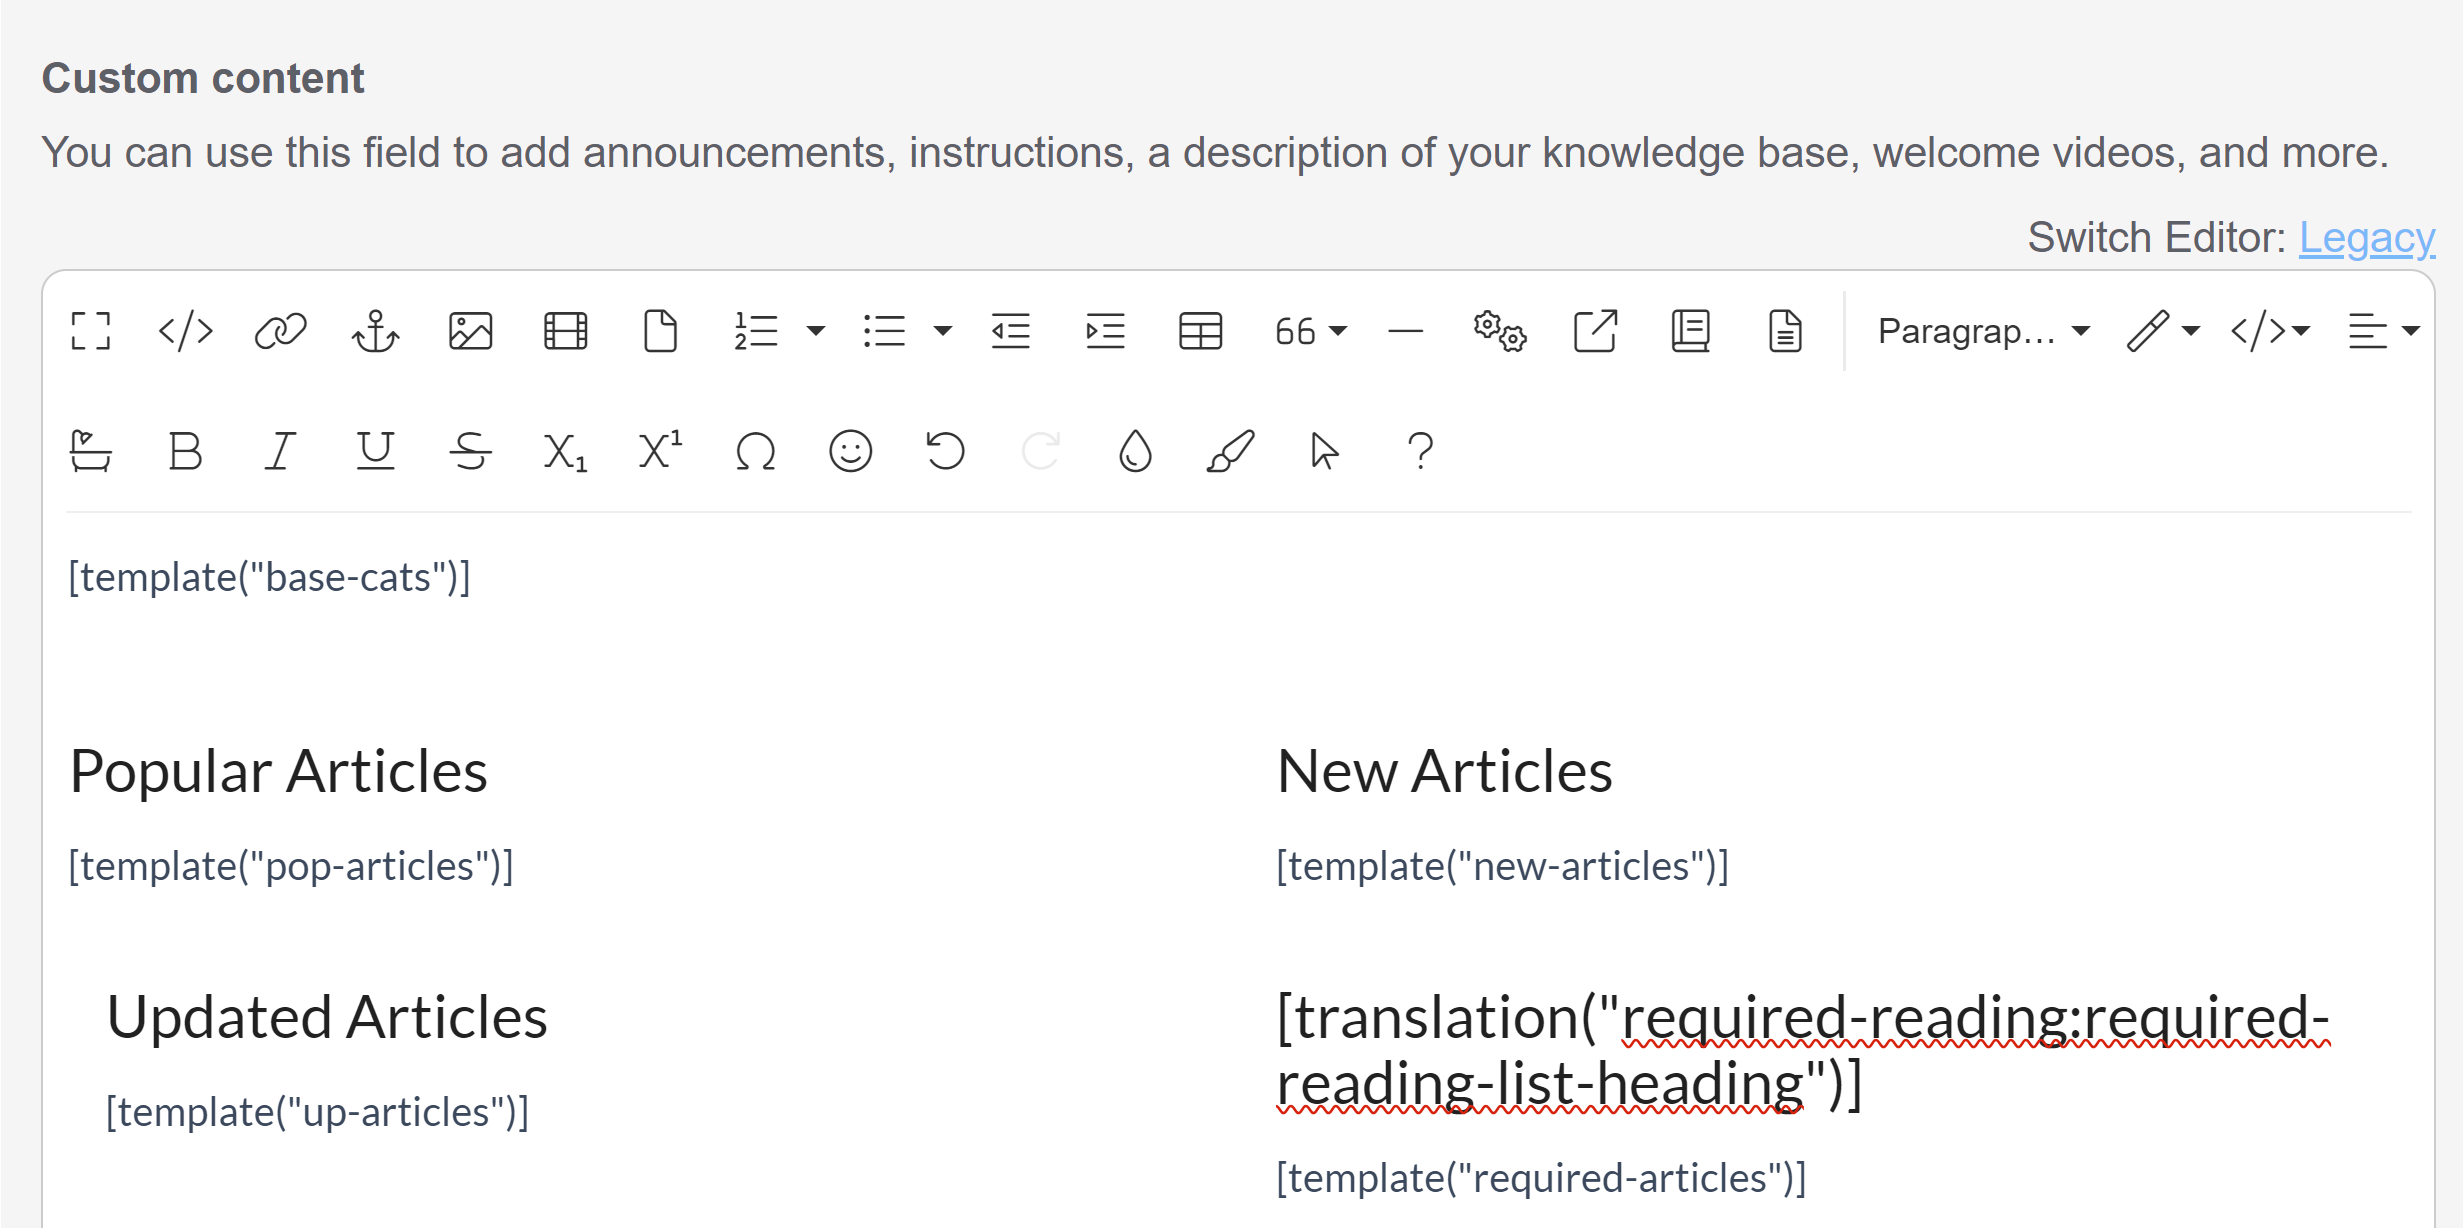 The Homepage custom content editor. It displays the base-cats template followed by four sections: Popular Articles, New Articles, Updated Articles, and a section with the translation merge code title referenced above and the required articles template below it.